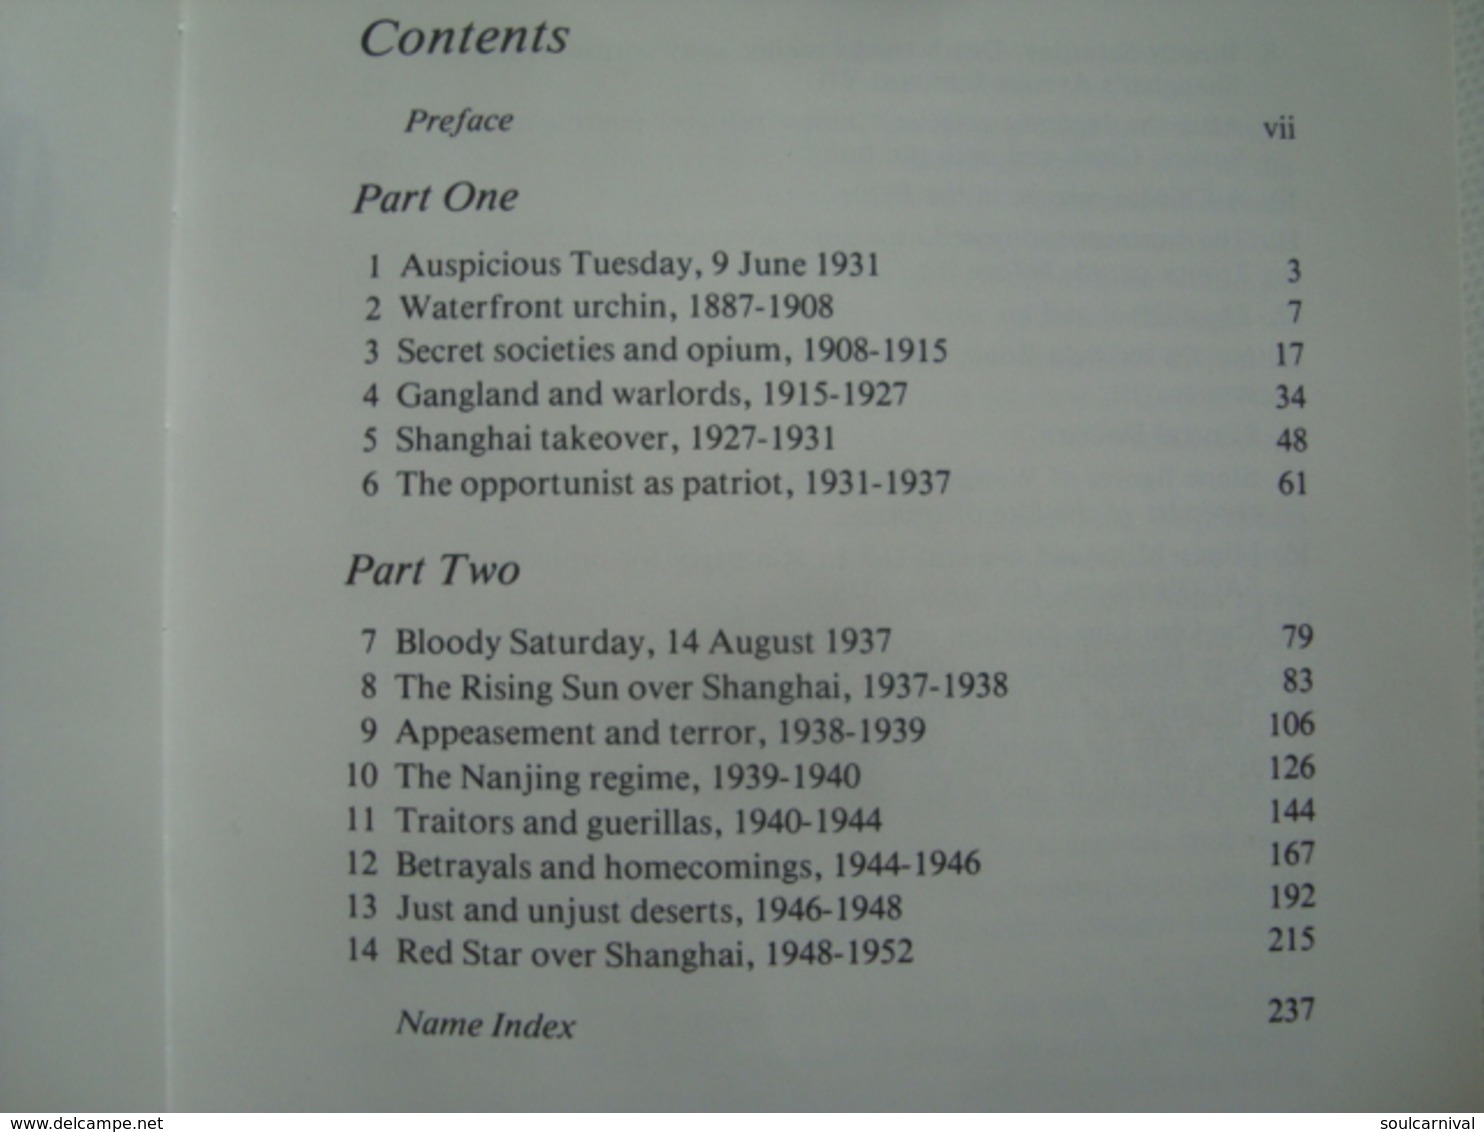 PAN LING - OLD SHANGHAI. GANGSTERS IN PARADISE - CHINA, HEINEMANN ASIA, 1984. - Asiatica